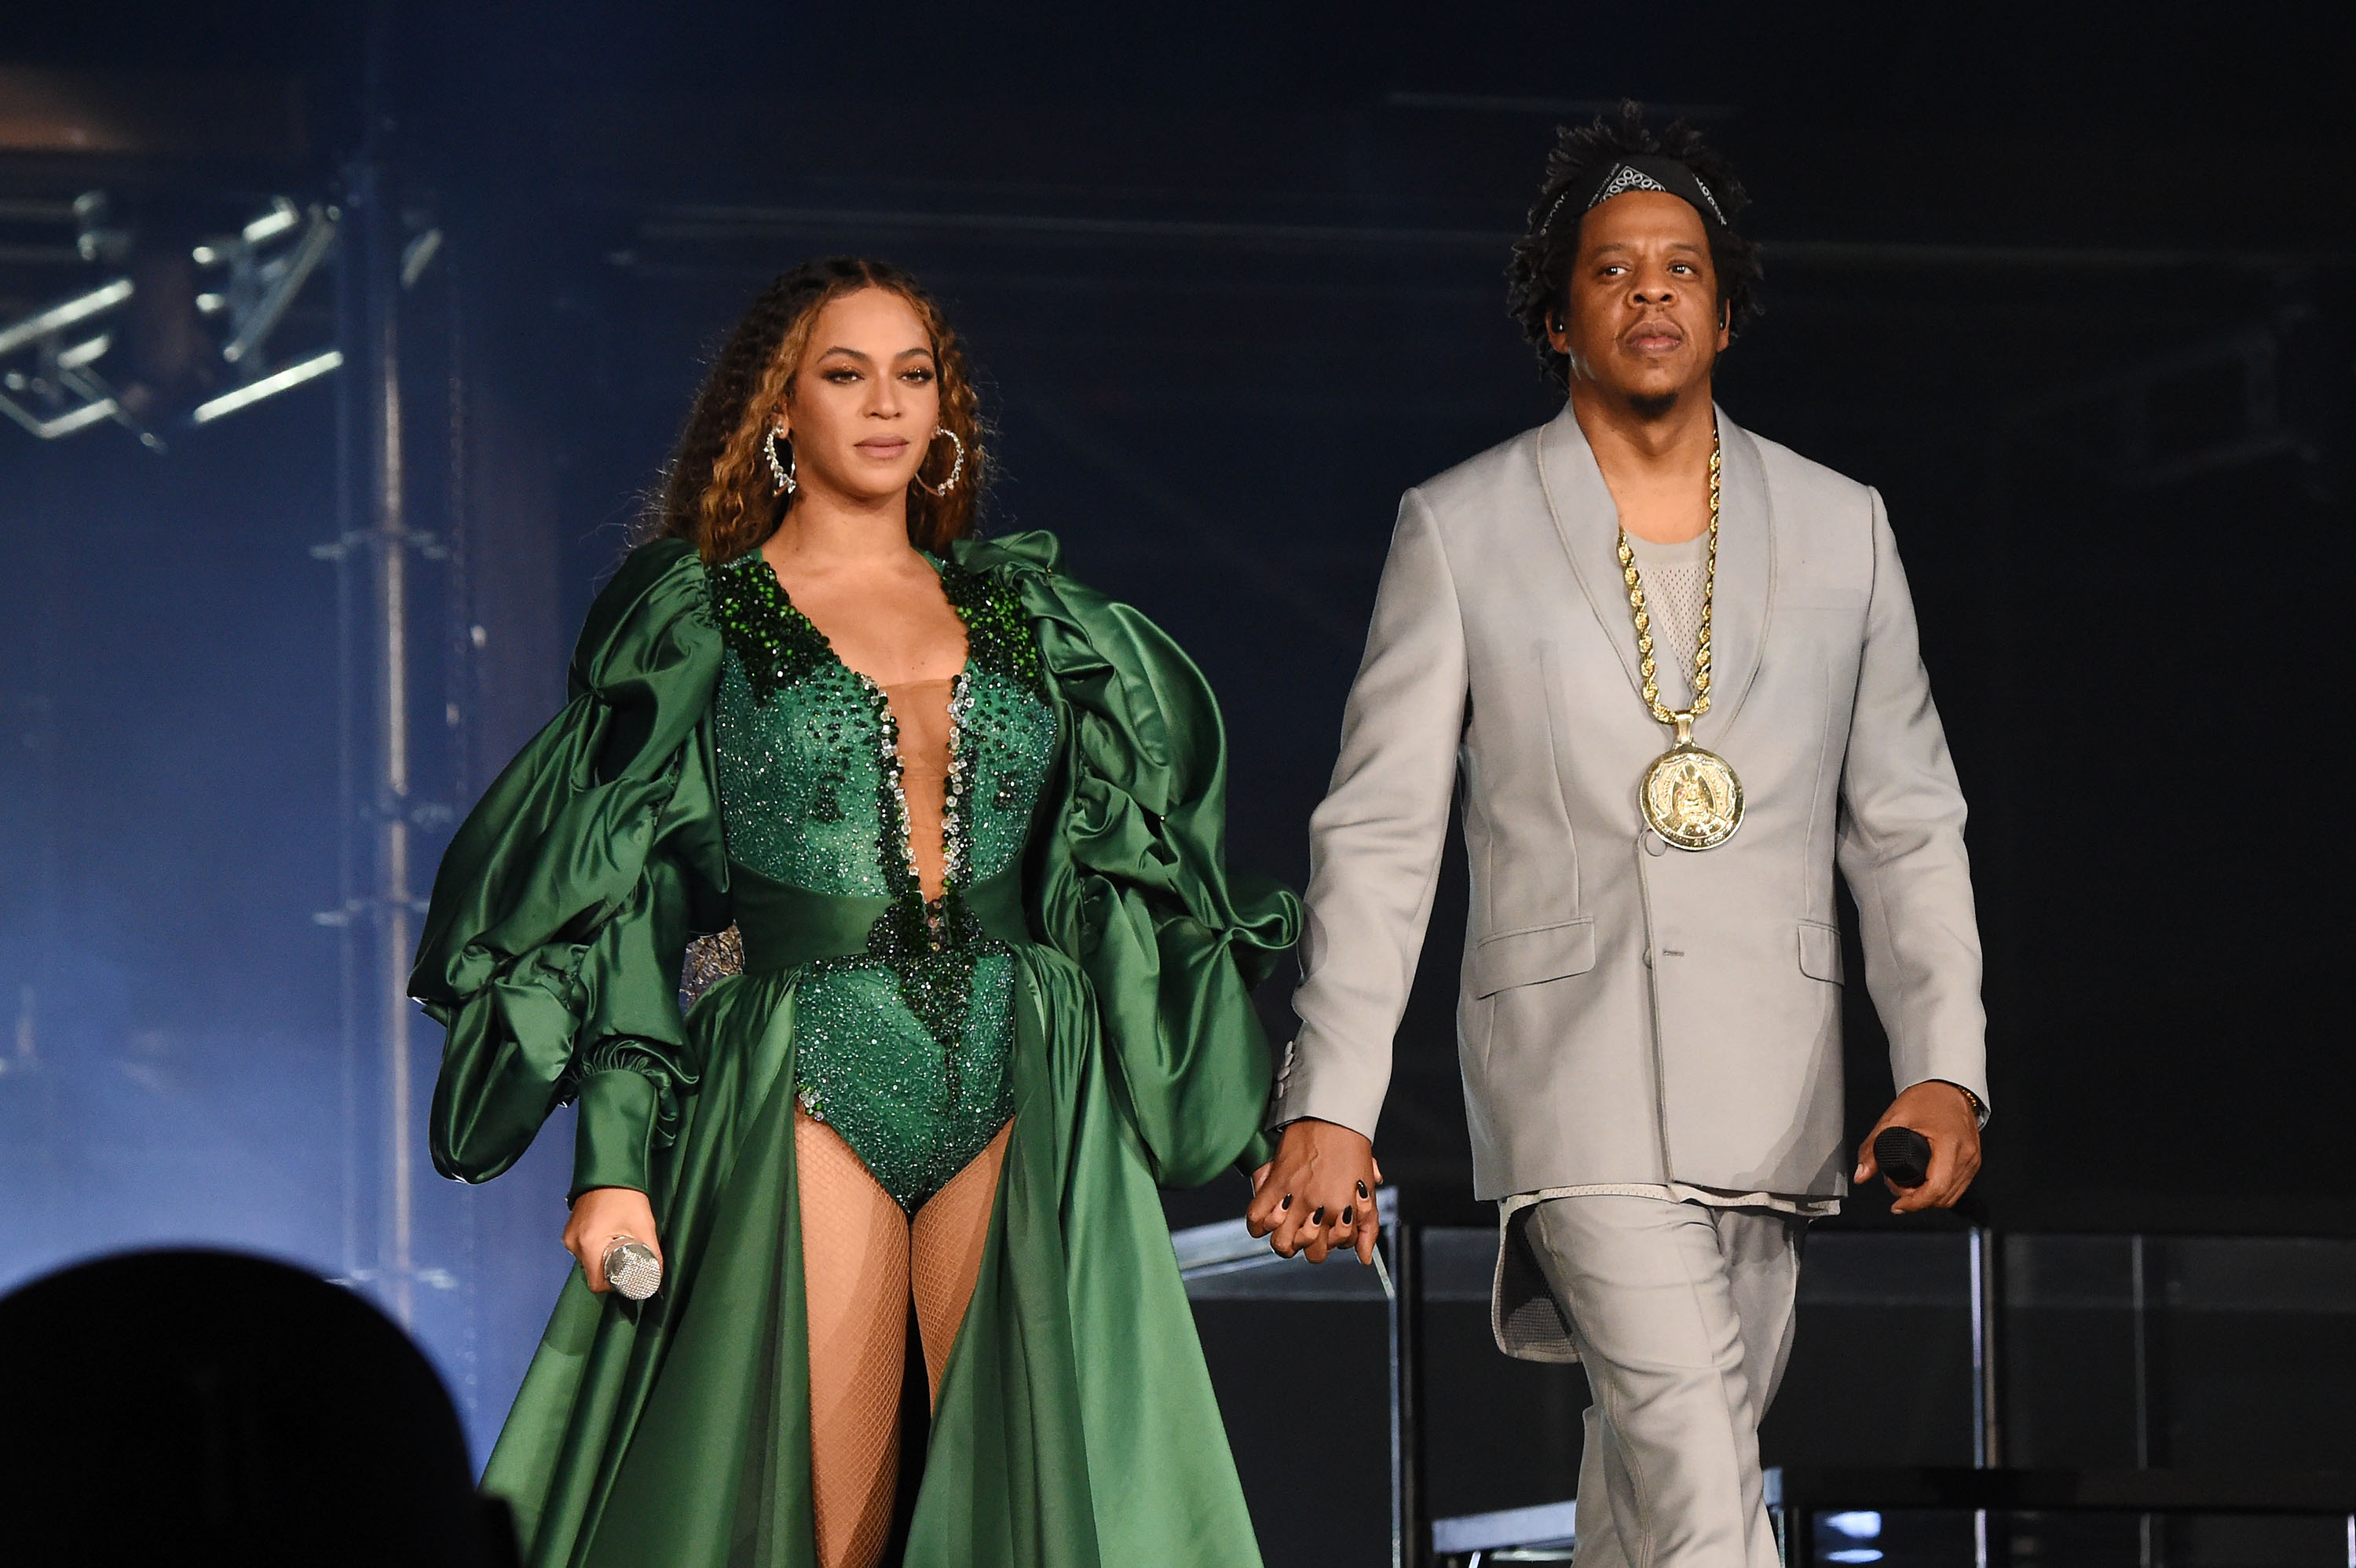 Beyonce & Jay-Z Had One Of 2018’s Highest-Grossing Tours  With $250M